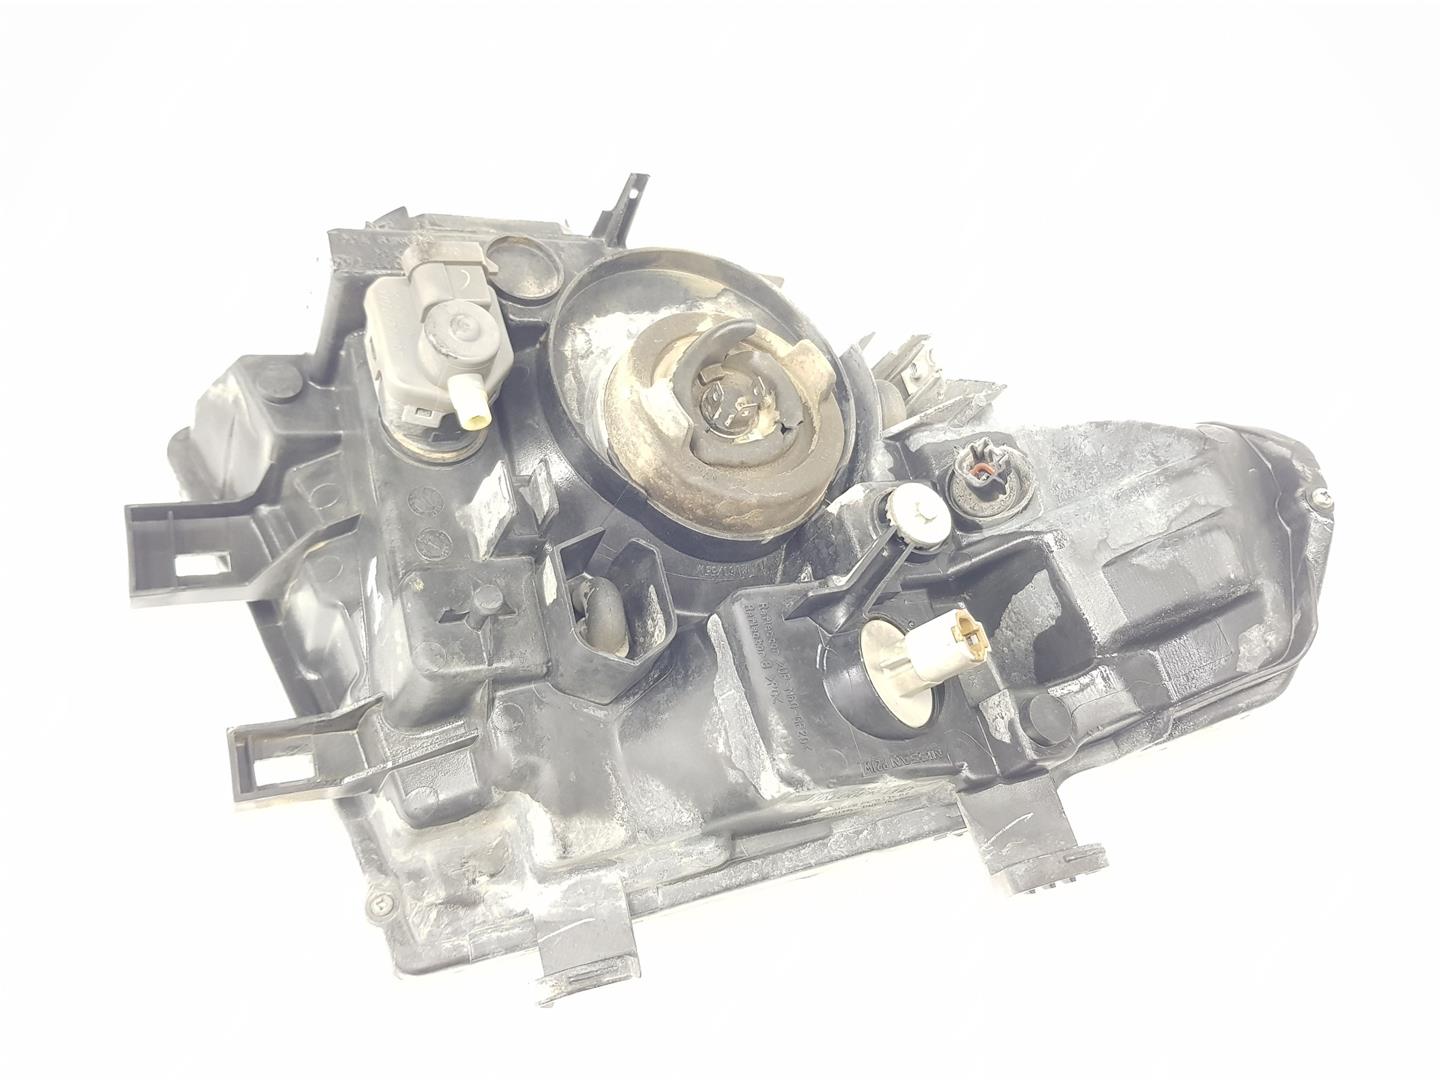 NISSAN NP300 1 generation (2008-2015) Front Left Headlight 26060EB30A, 26060EB30A 24236131